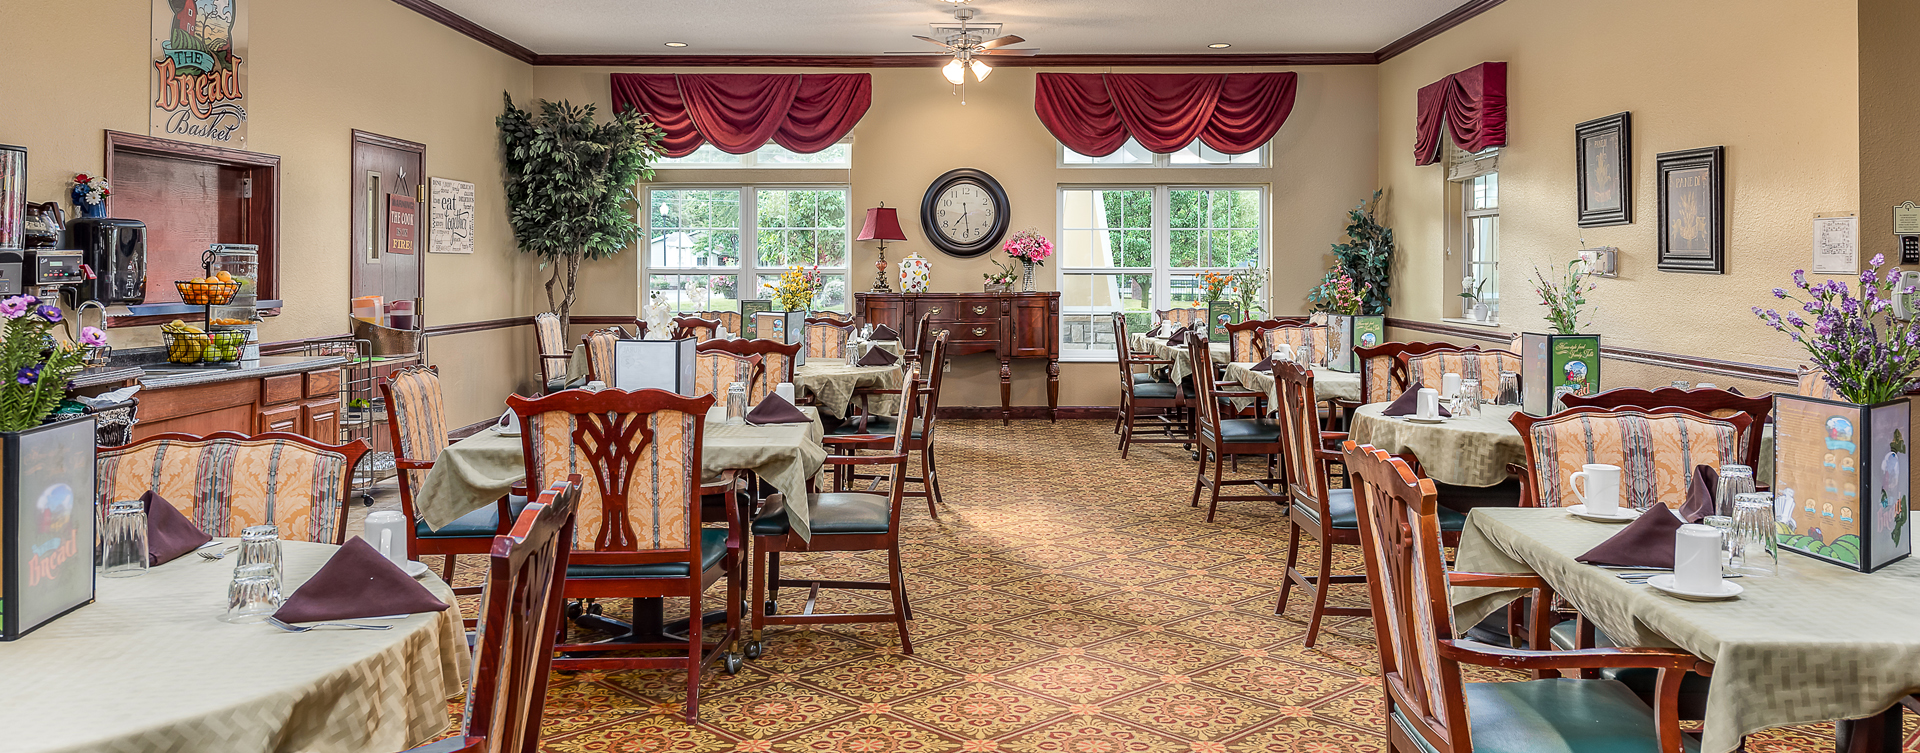 Enjoy restaurant -style meals served three times a day in our dining room at Bickford of Saginaw Township